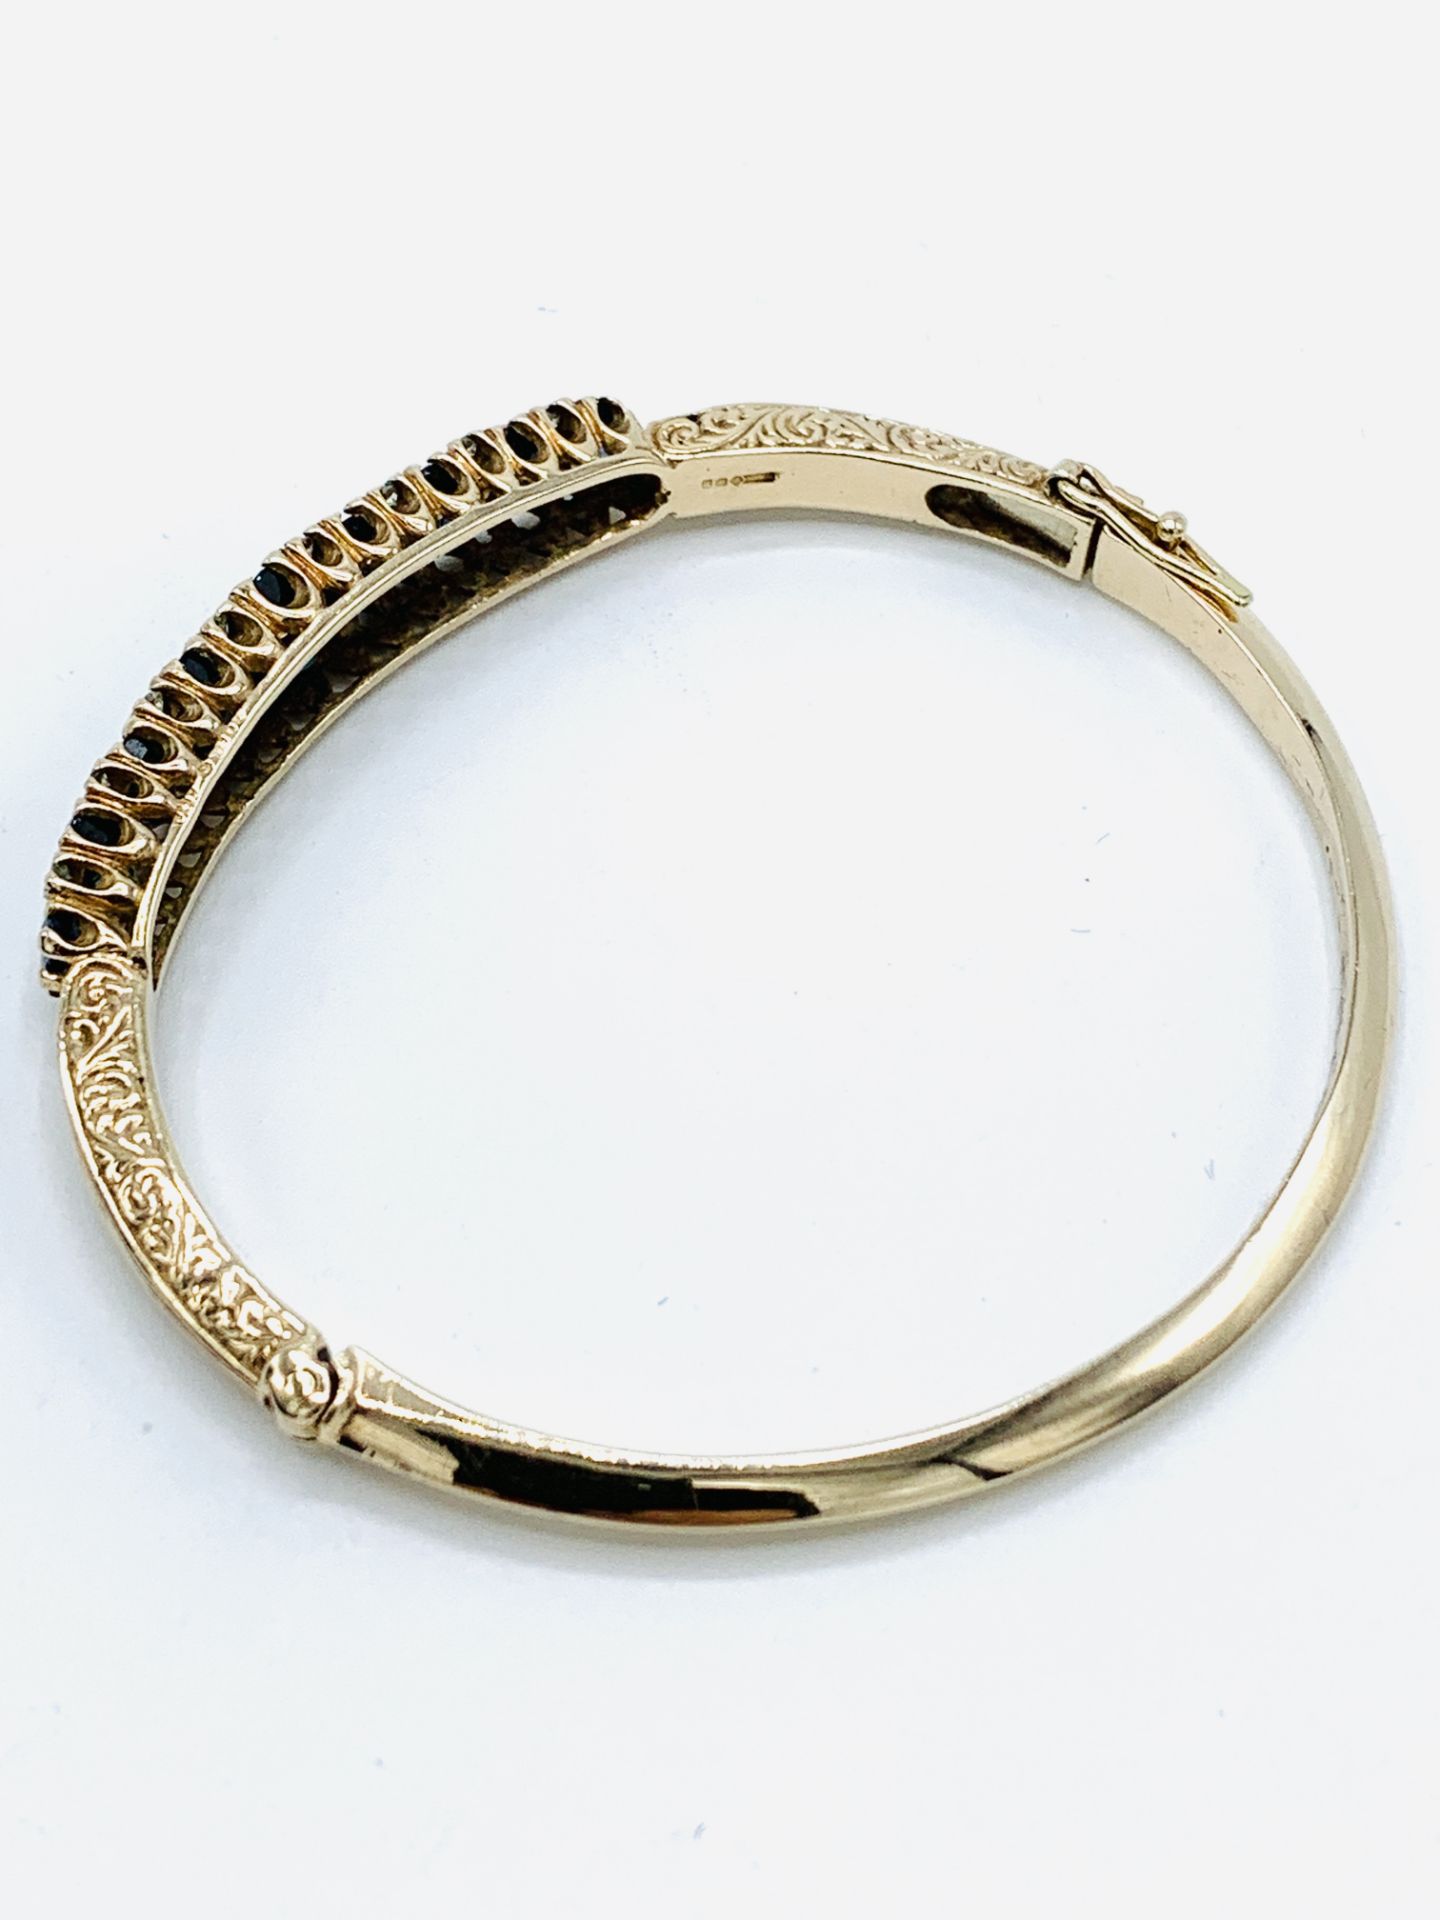 9ct gold bracelet set with 9 clawset graduated sapphires and small diamonds. - Image 2 of 4